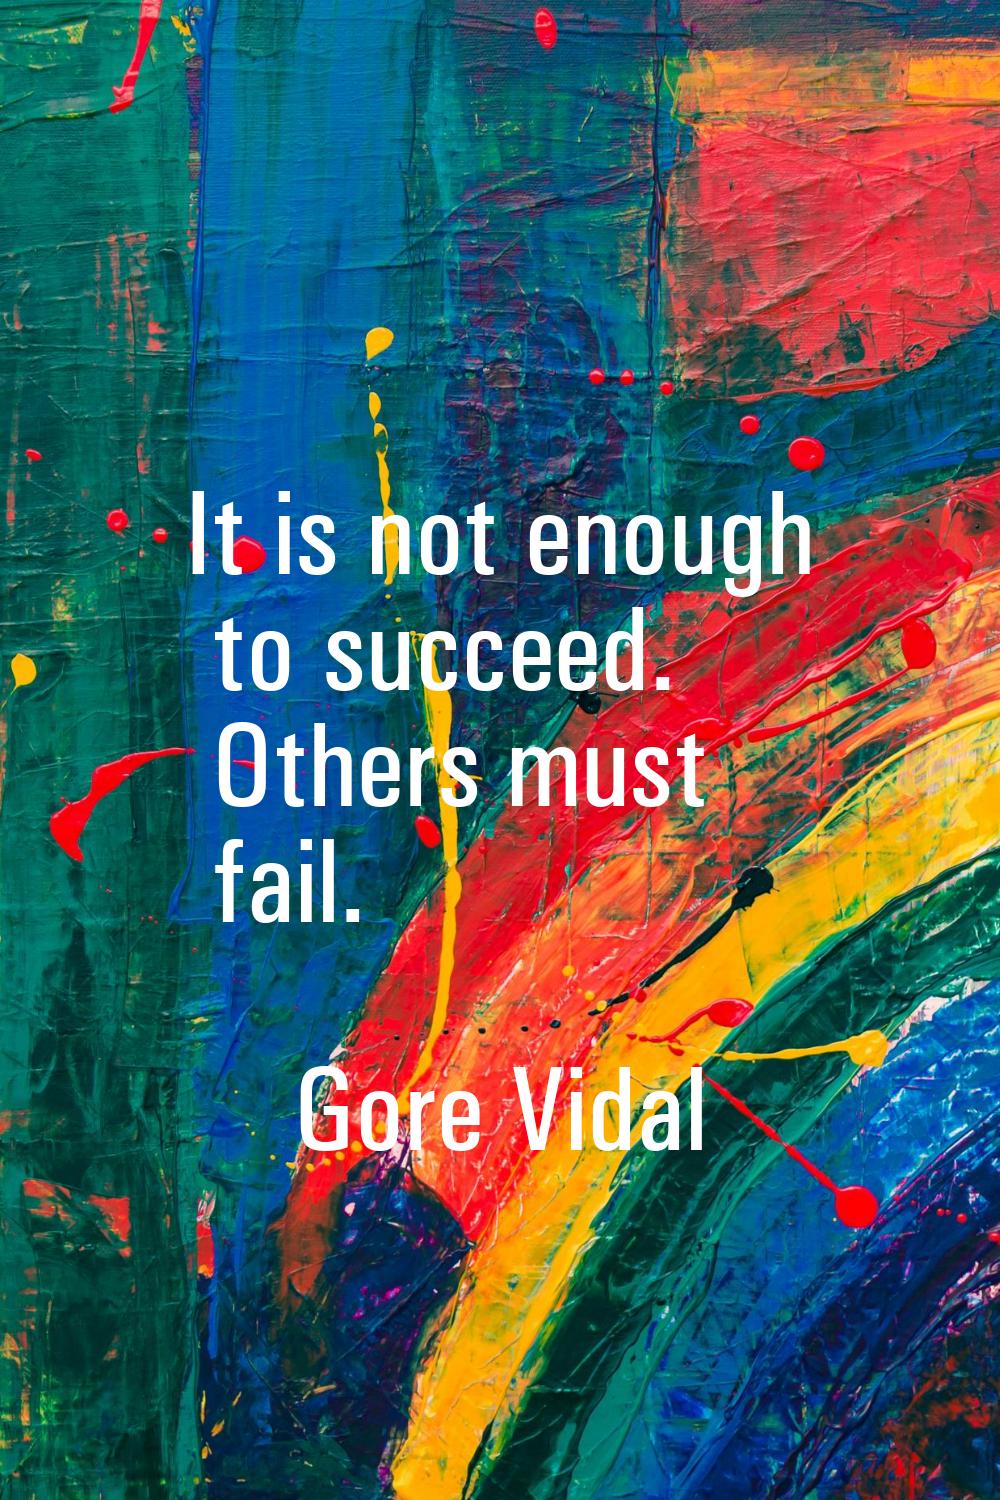 It is not enough to succeed. Others must fail.